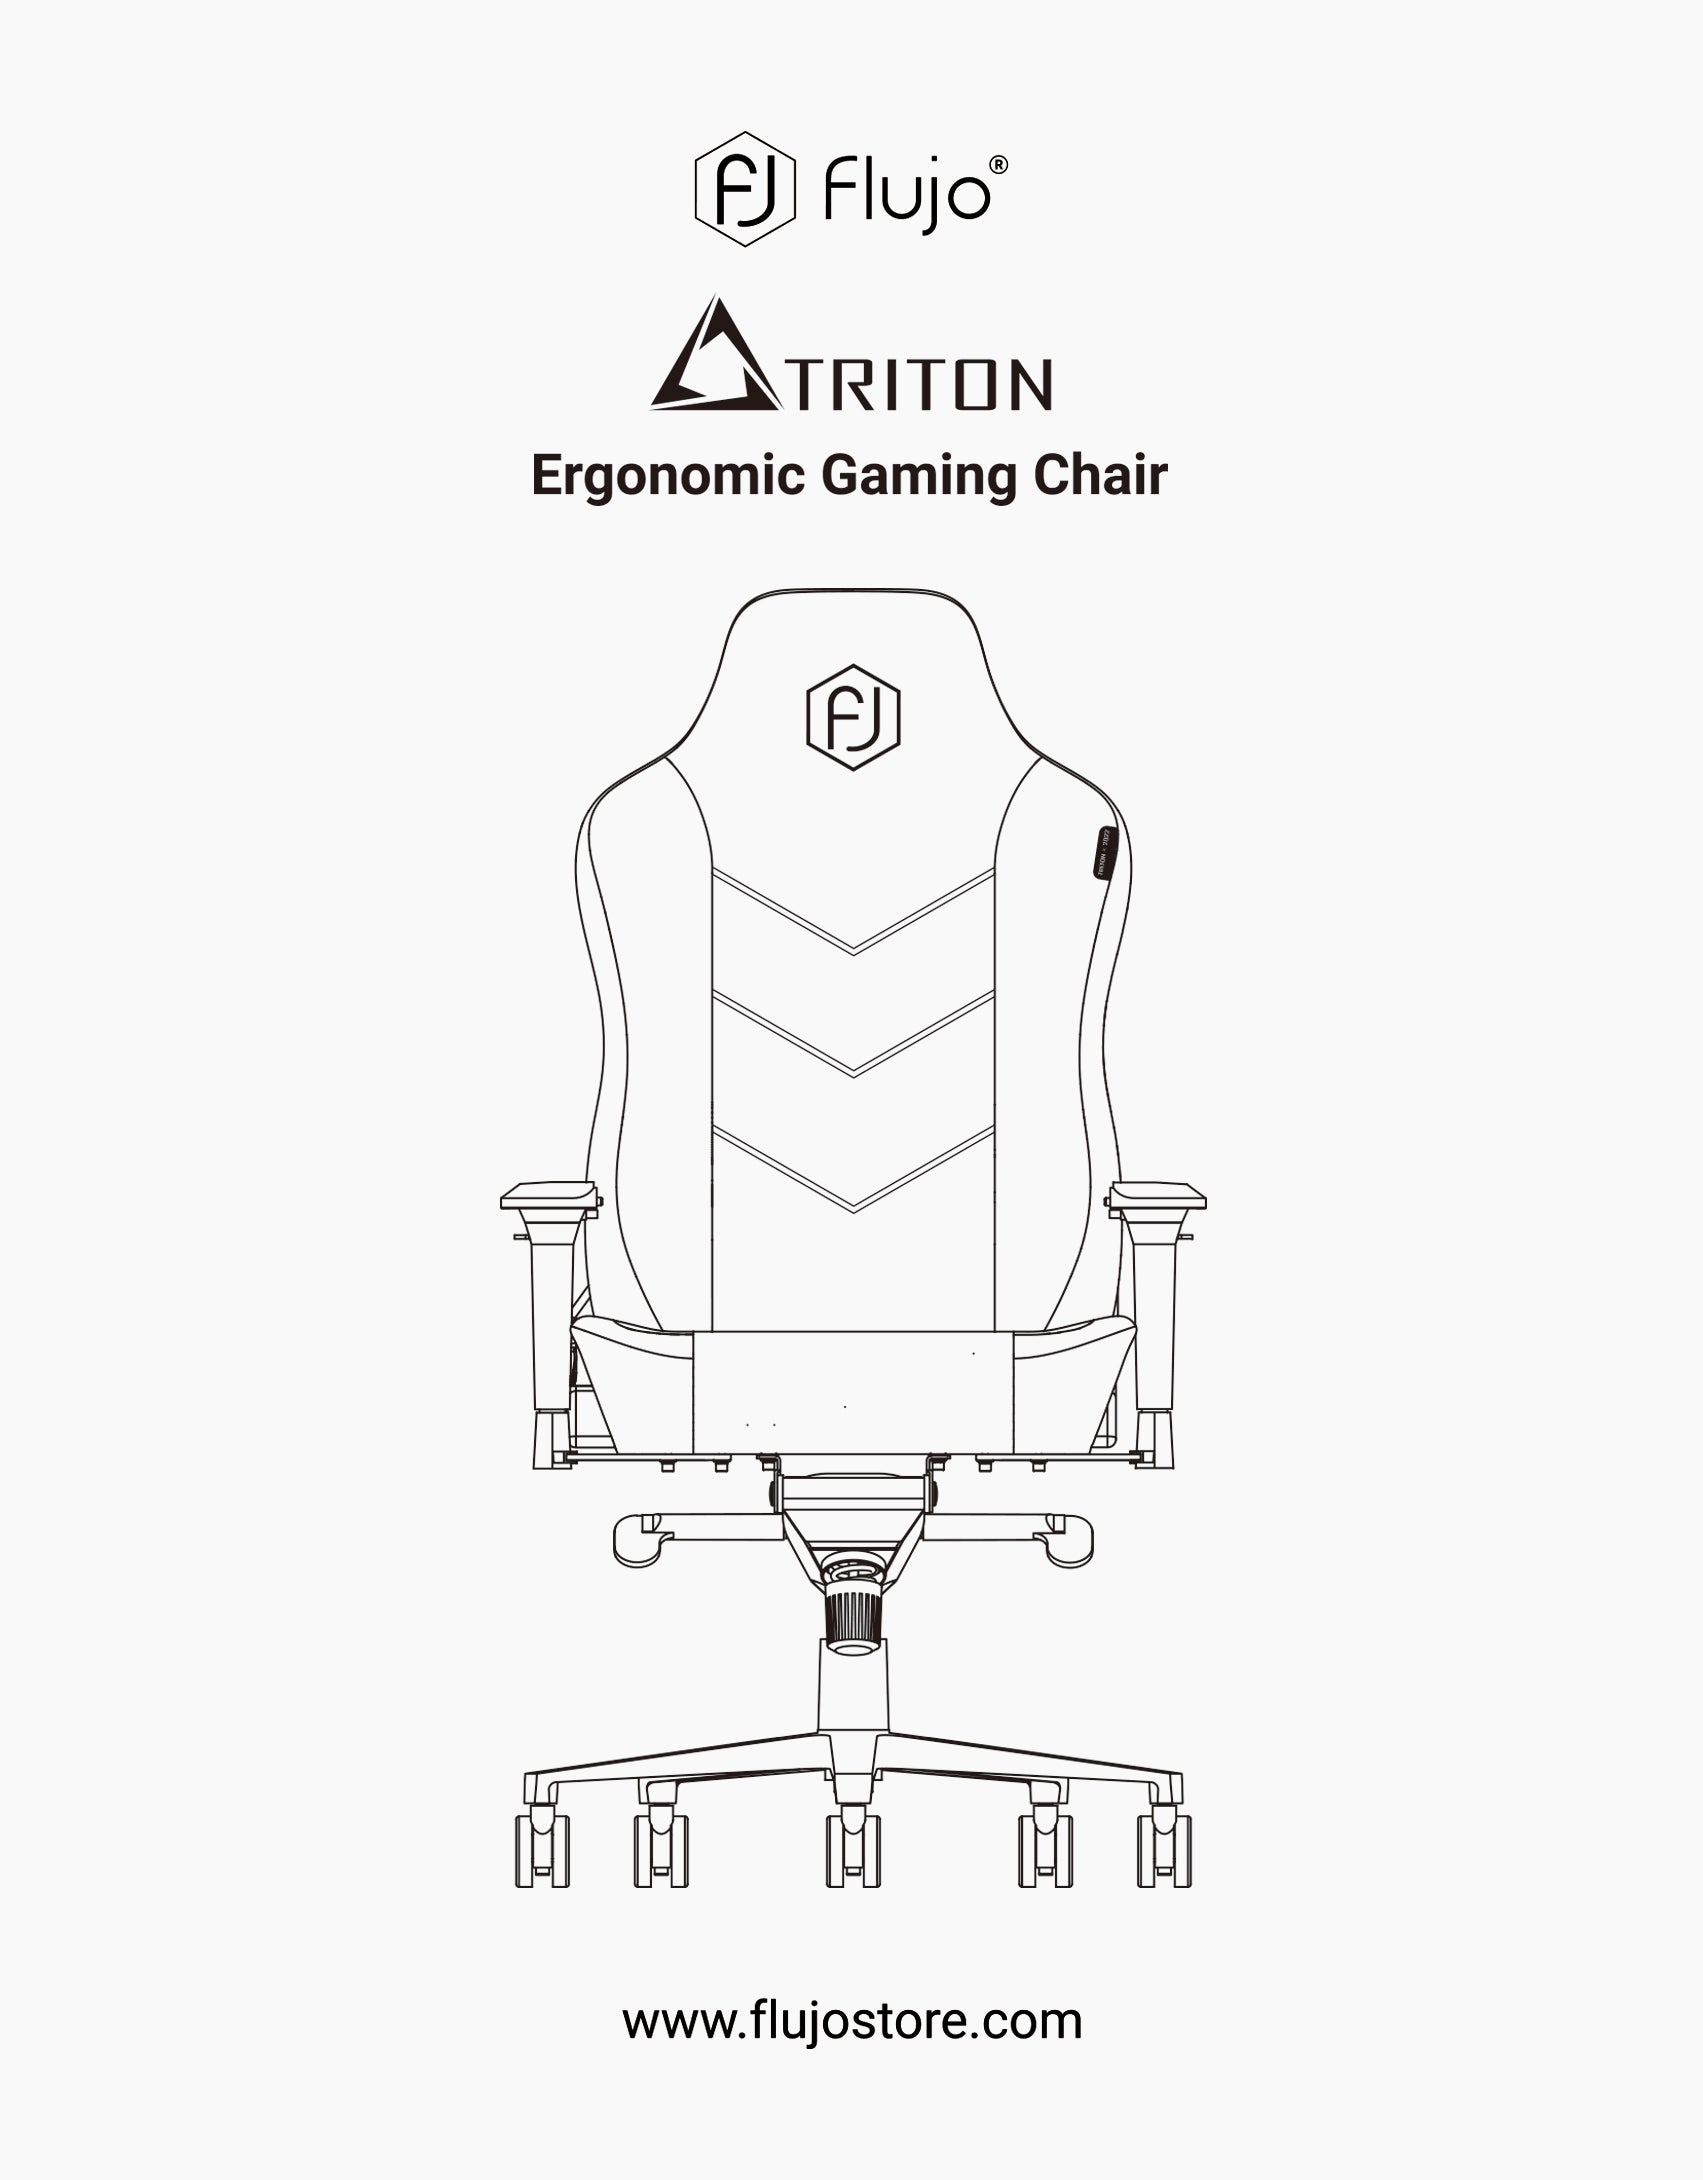 Artwork of the Flujo Triton Ergonomic Gaming Chair, with a racing-style backrest and shoulder support, from the gaming collection on the Flujo store website.